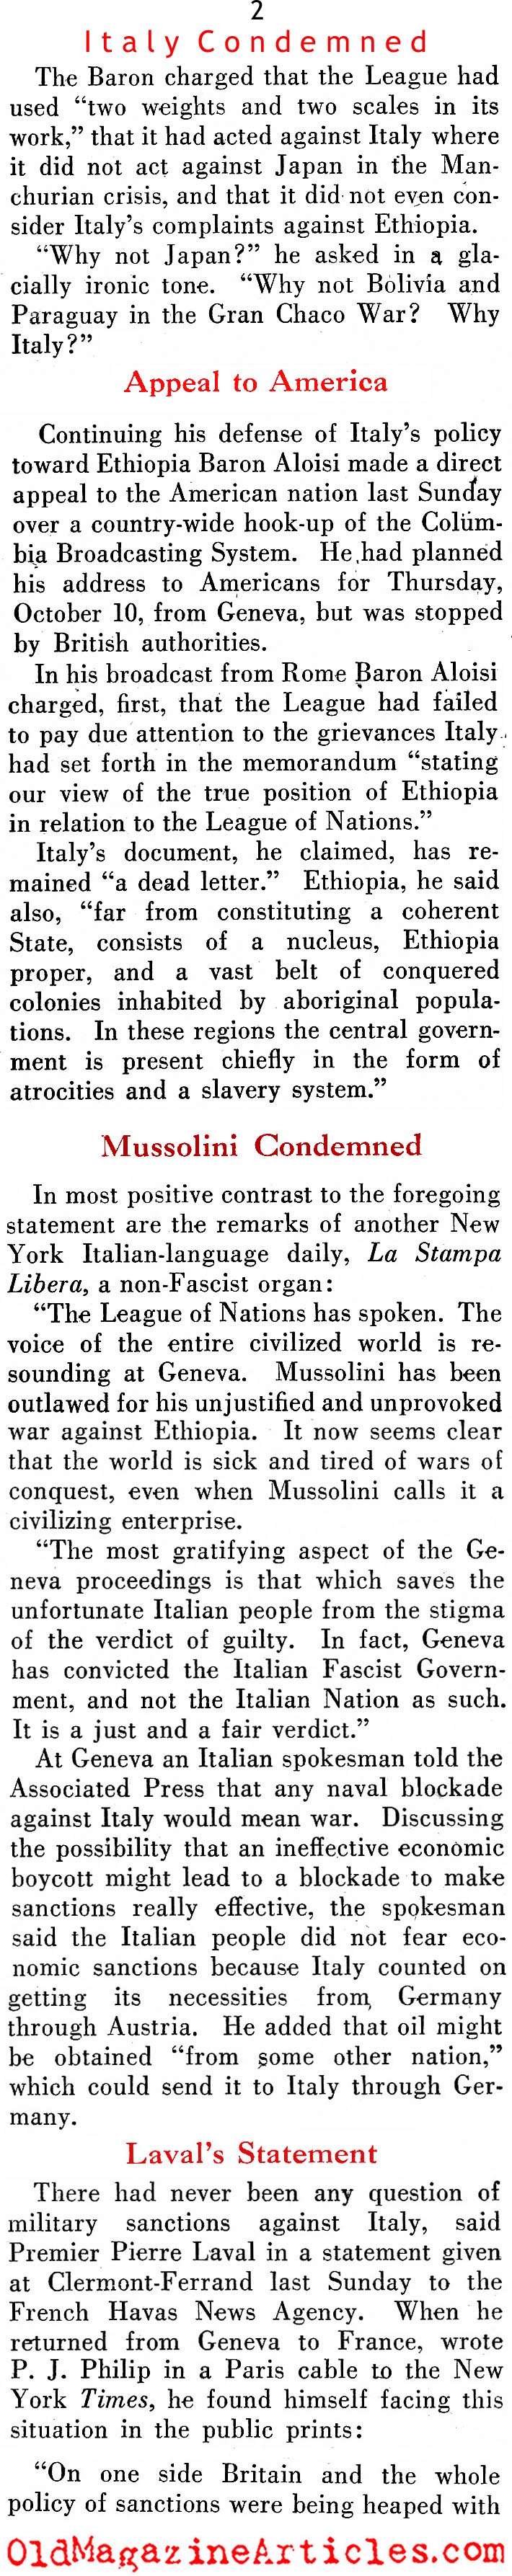 Italy Condemned (Literary Digest, 1935)